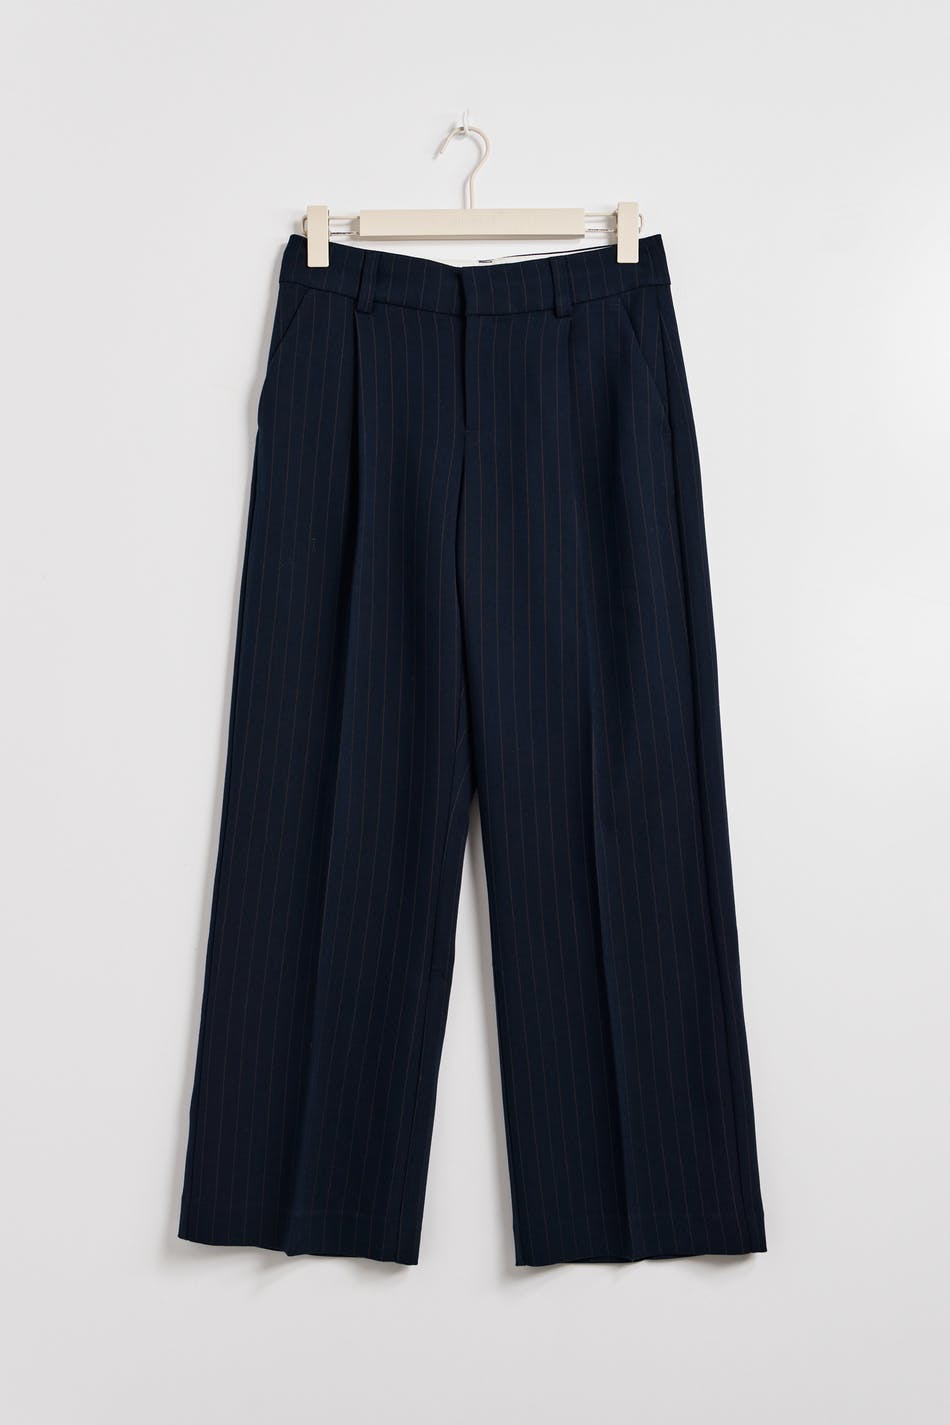 Gina Tricot - Low waist tall trousers - kostymbyxor - Blue - XL - Female